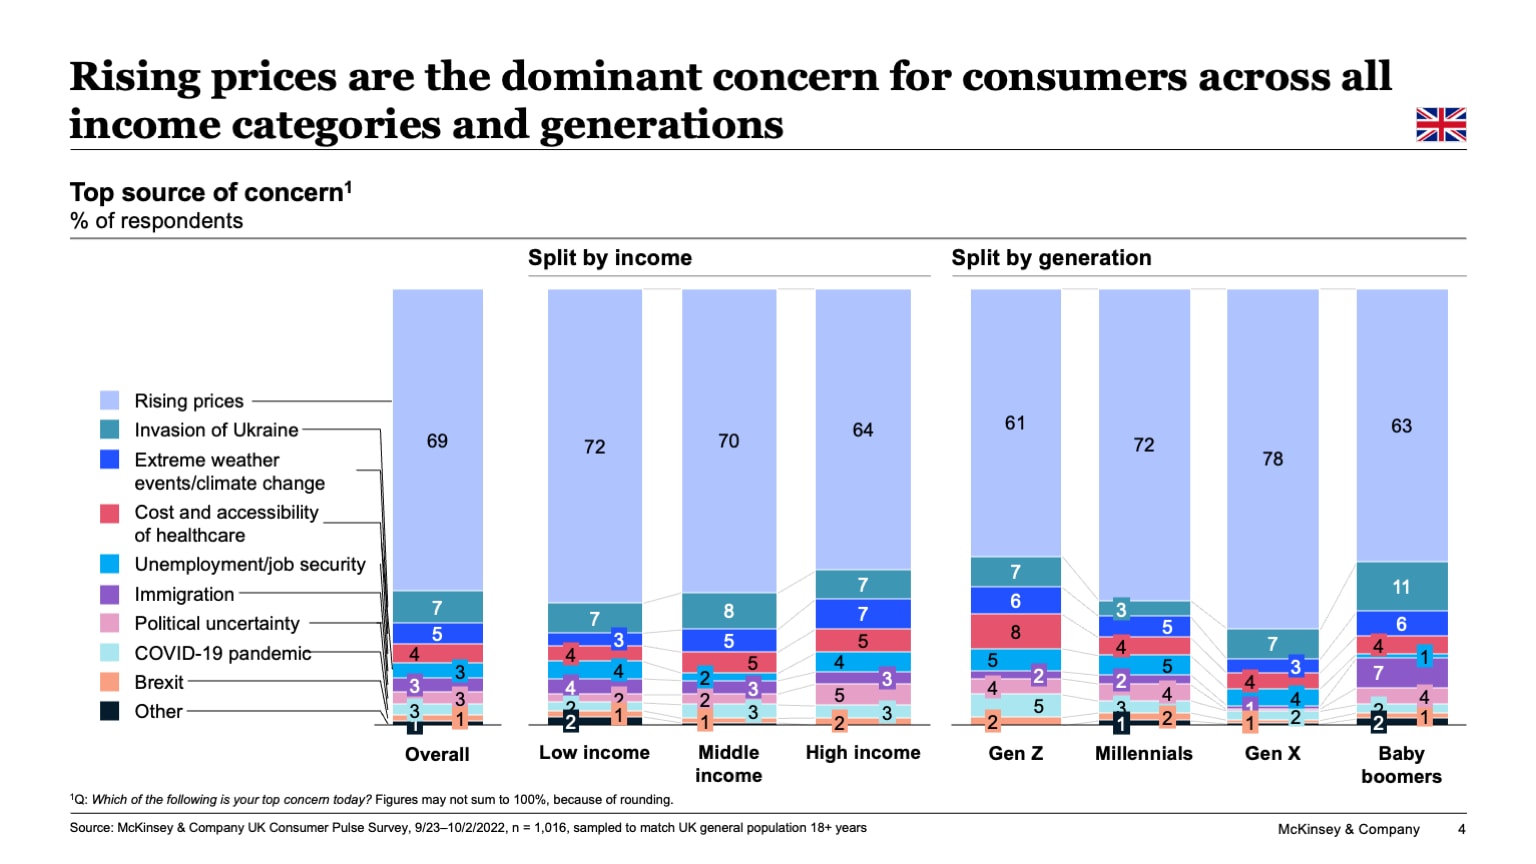 Rising prices are the dominant concern for consumers across all income categories and generations